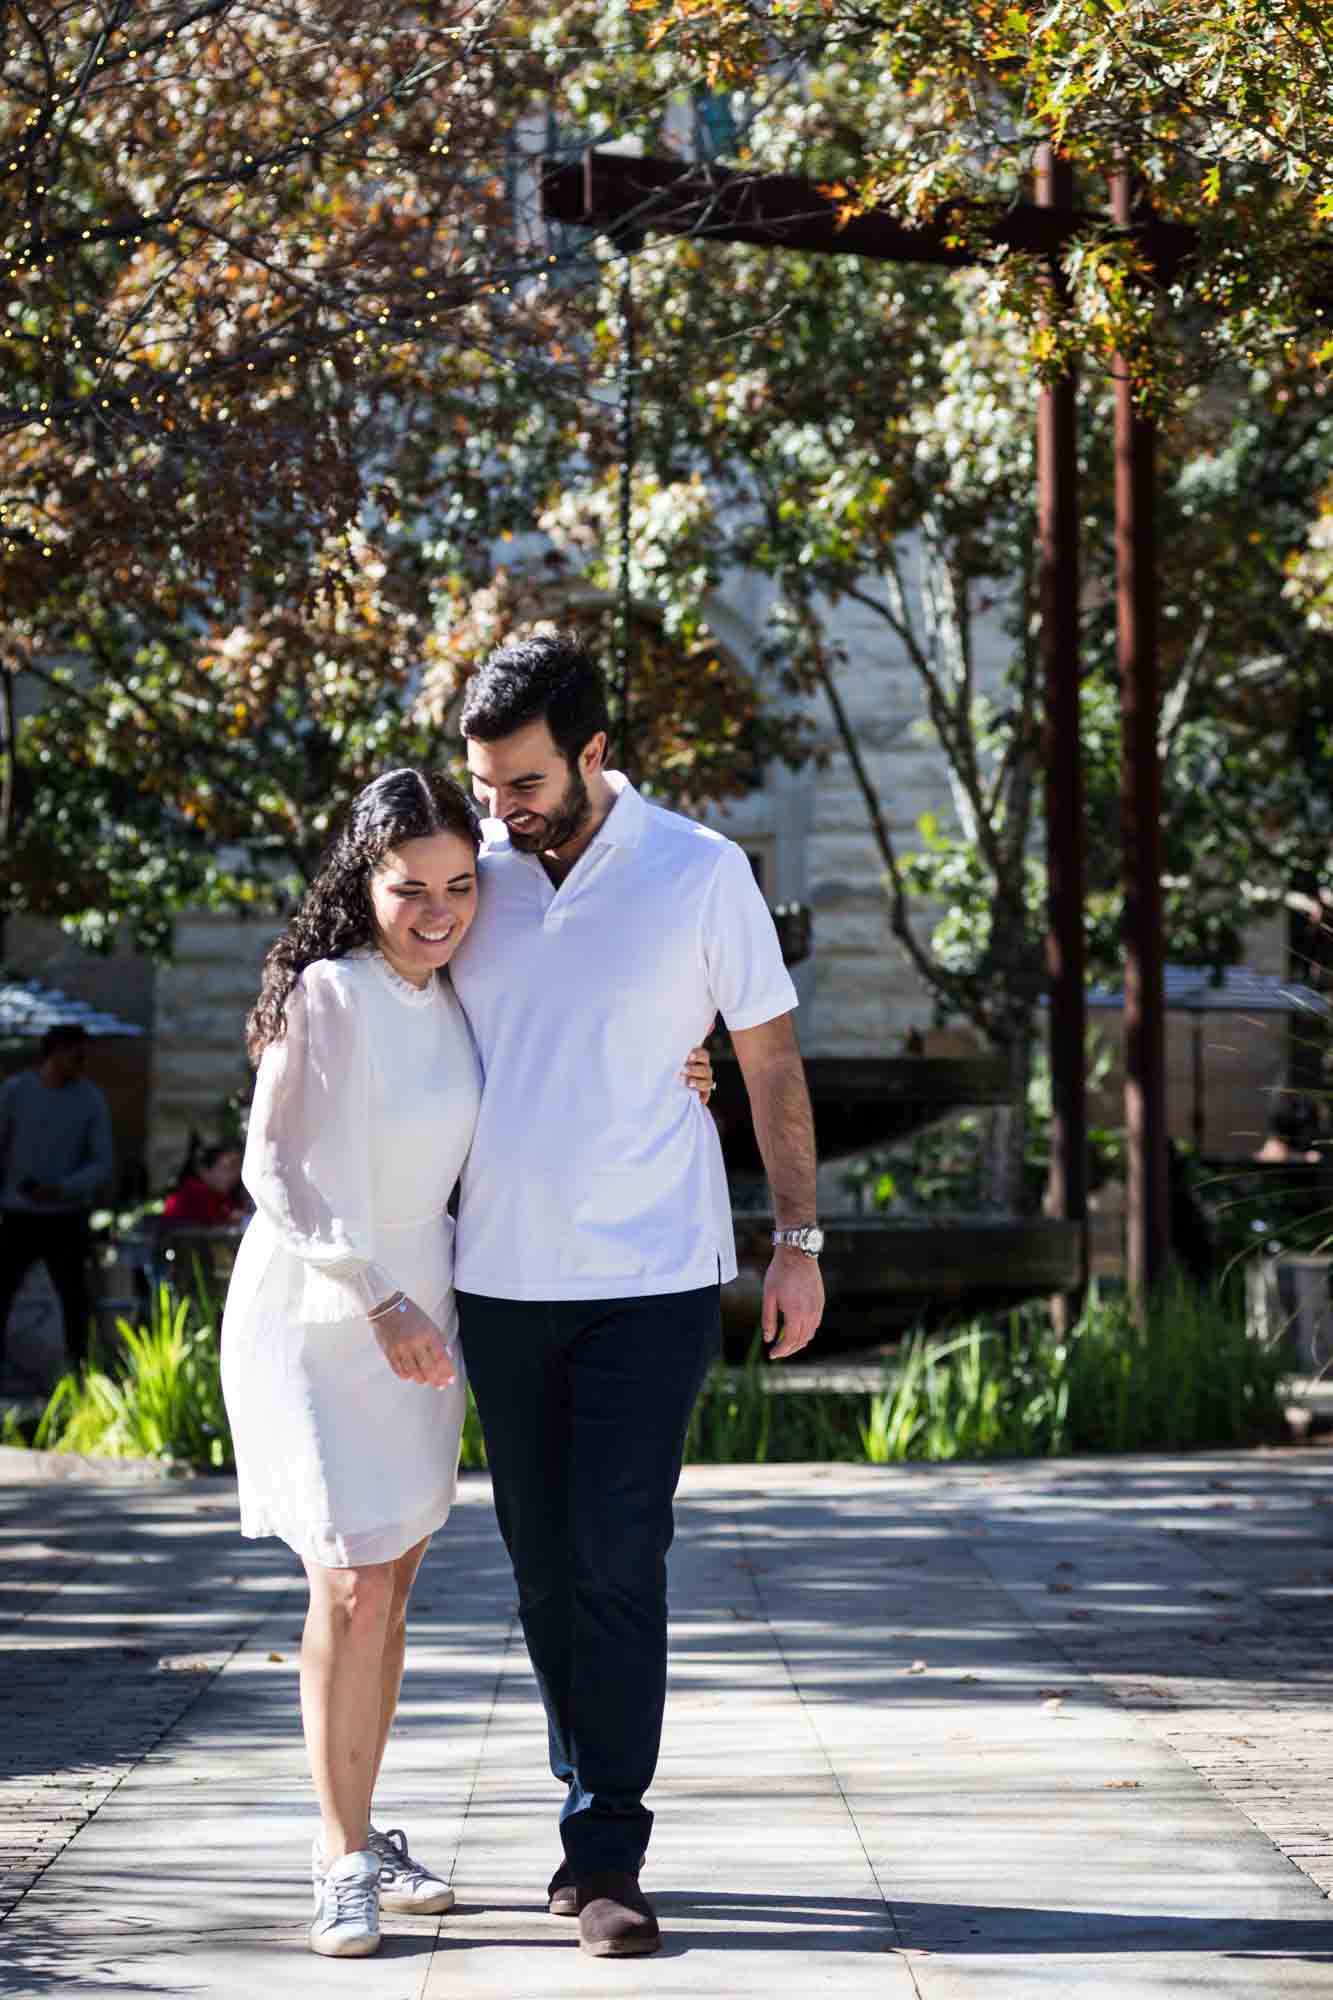 Couple walking on pathway with man's arm around woman during a Pearl engagement portrait session